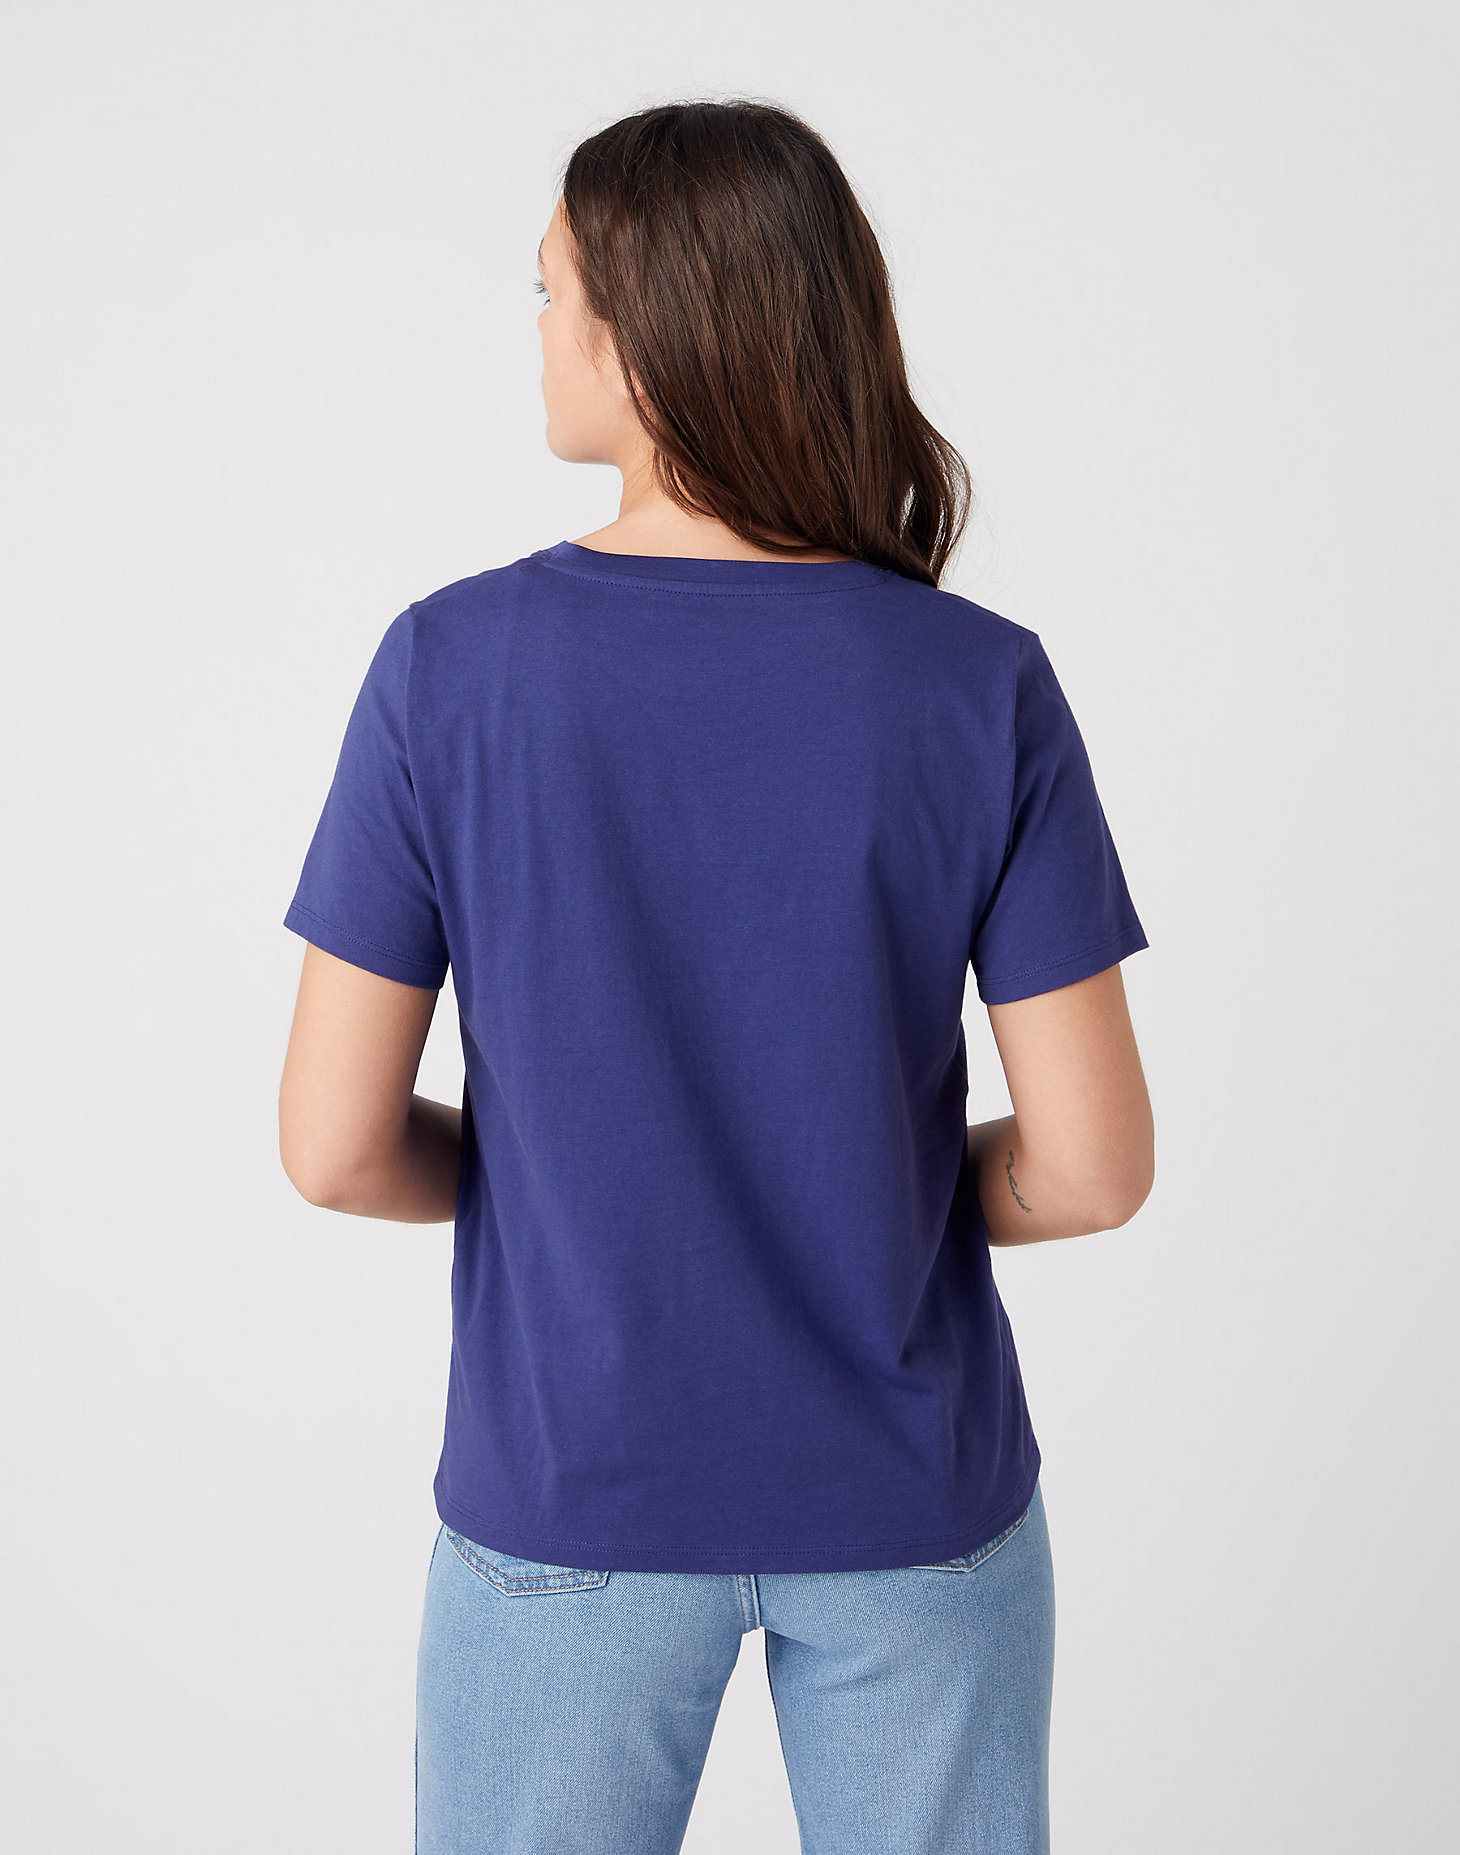 Round Tee in Blue Ribbon alternative view 2